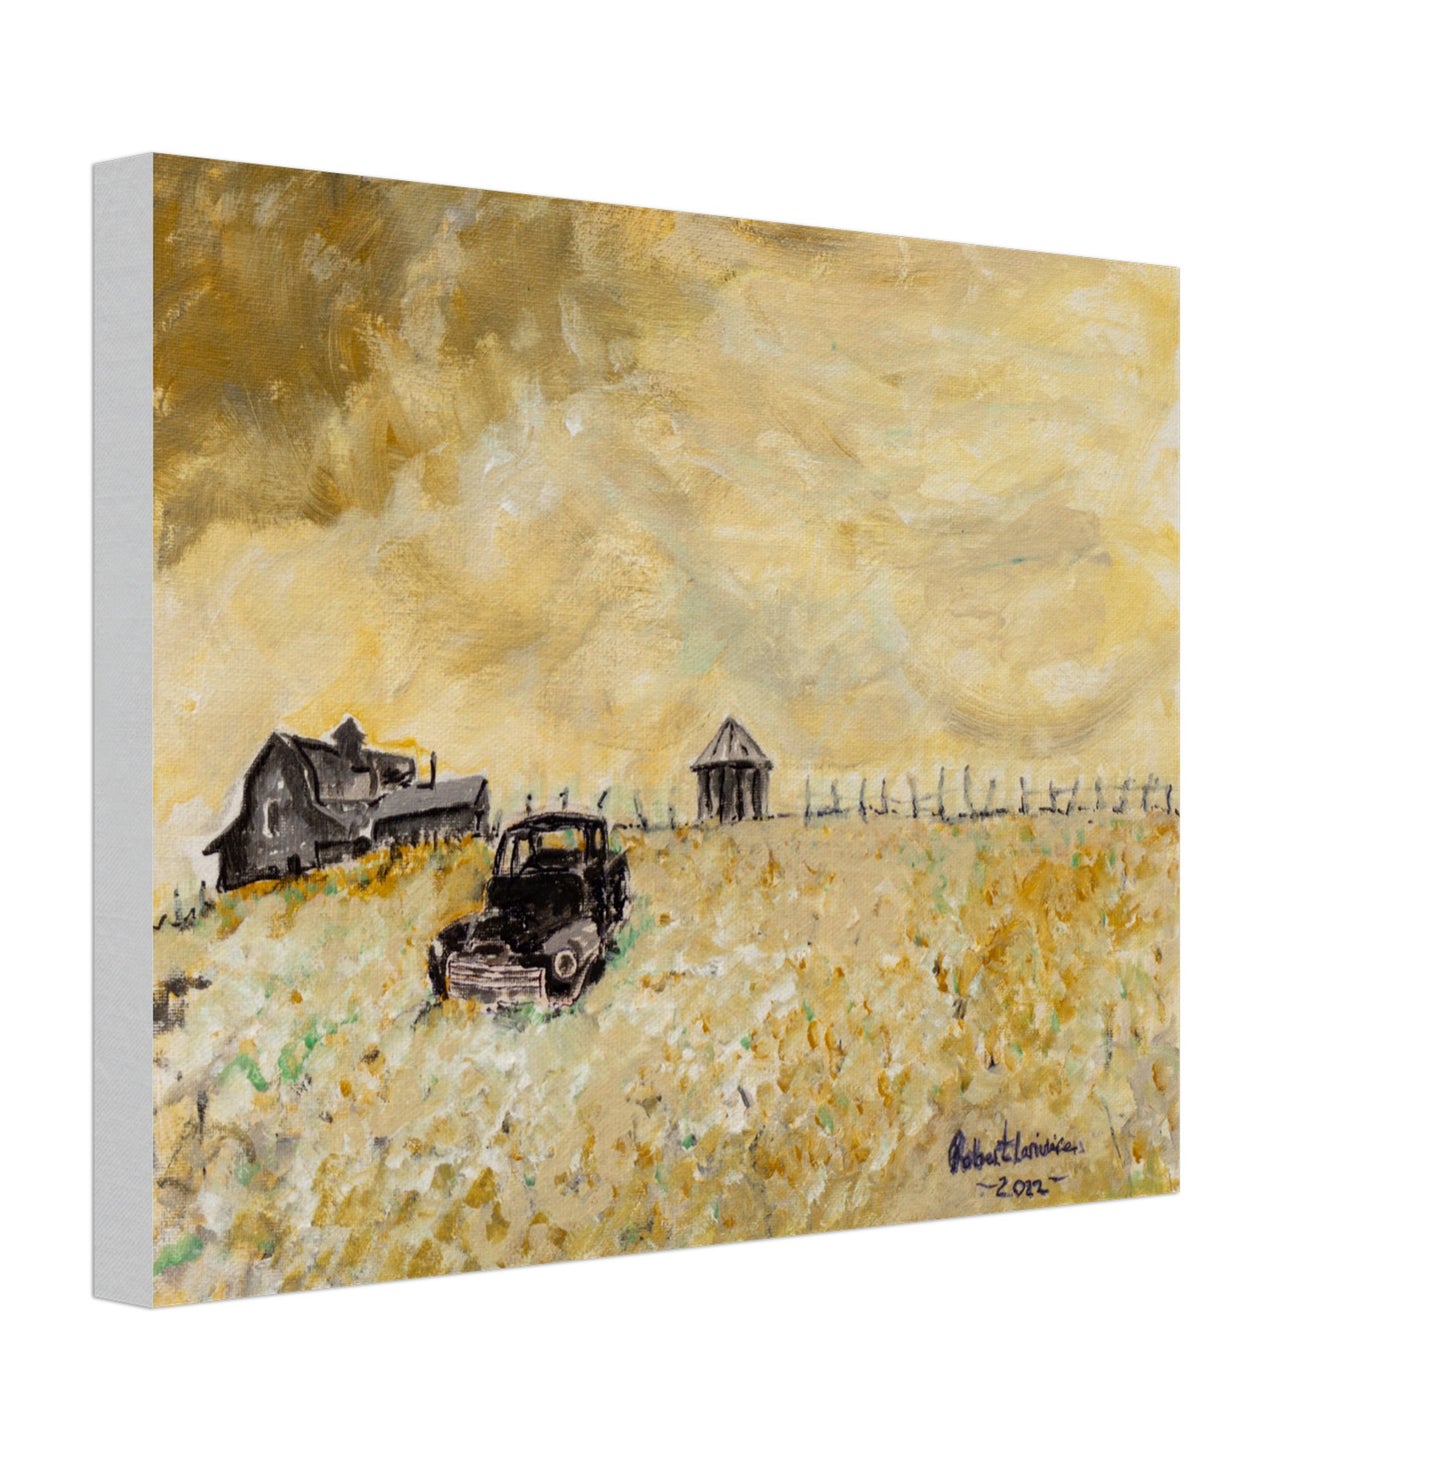 Old Farm and Truck - Canvas